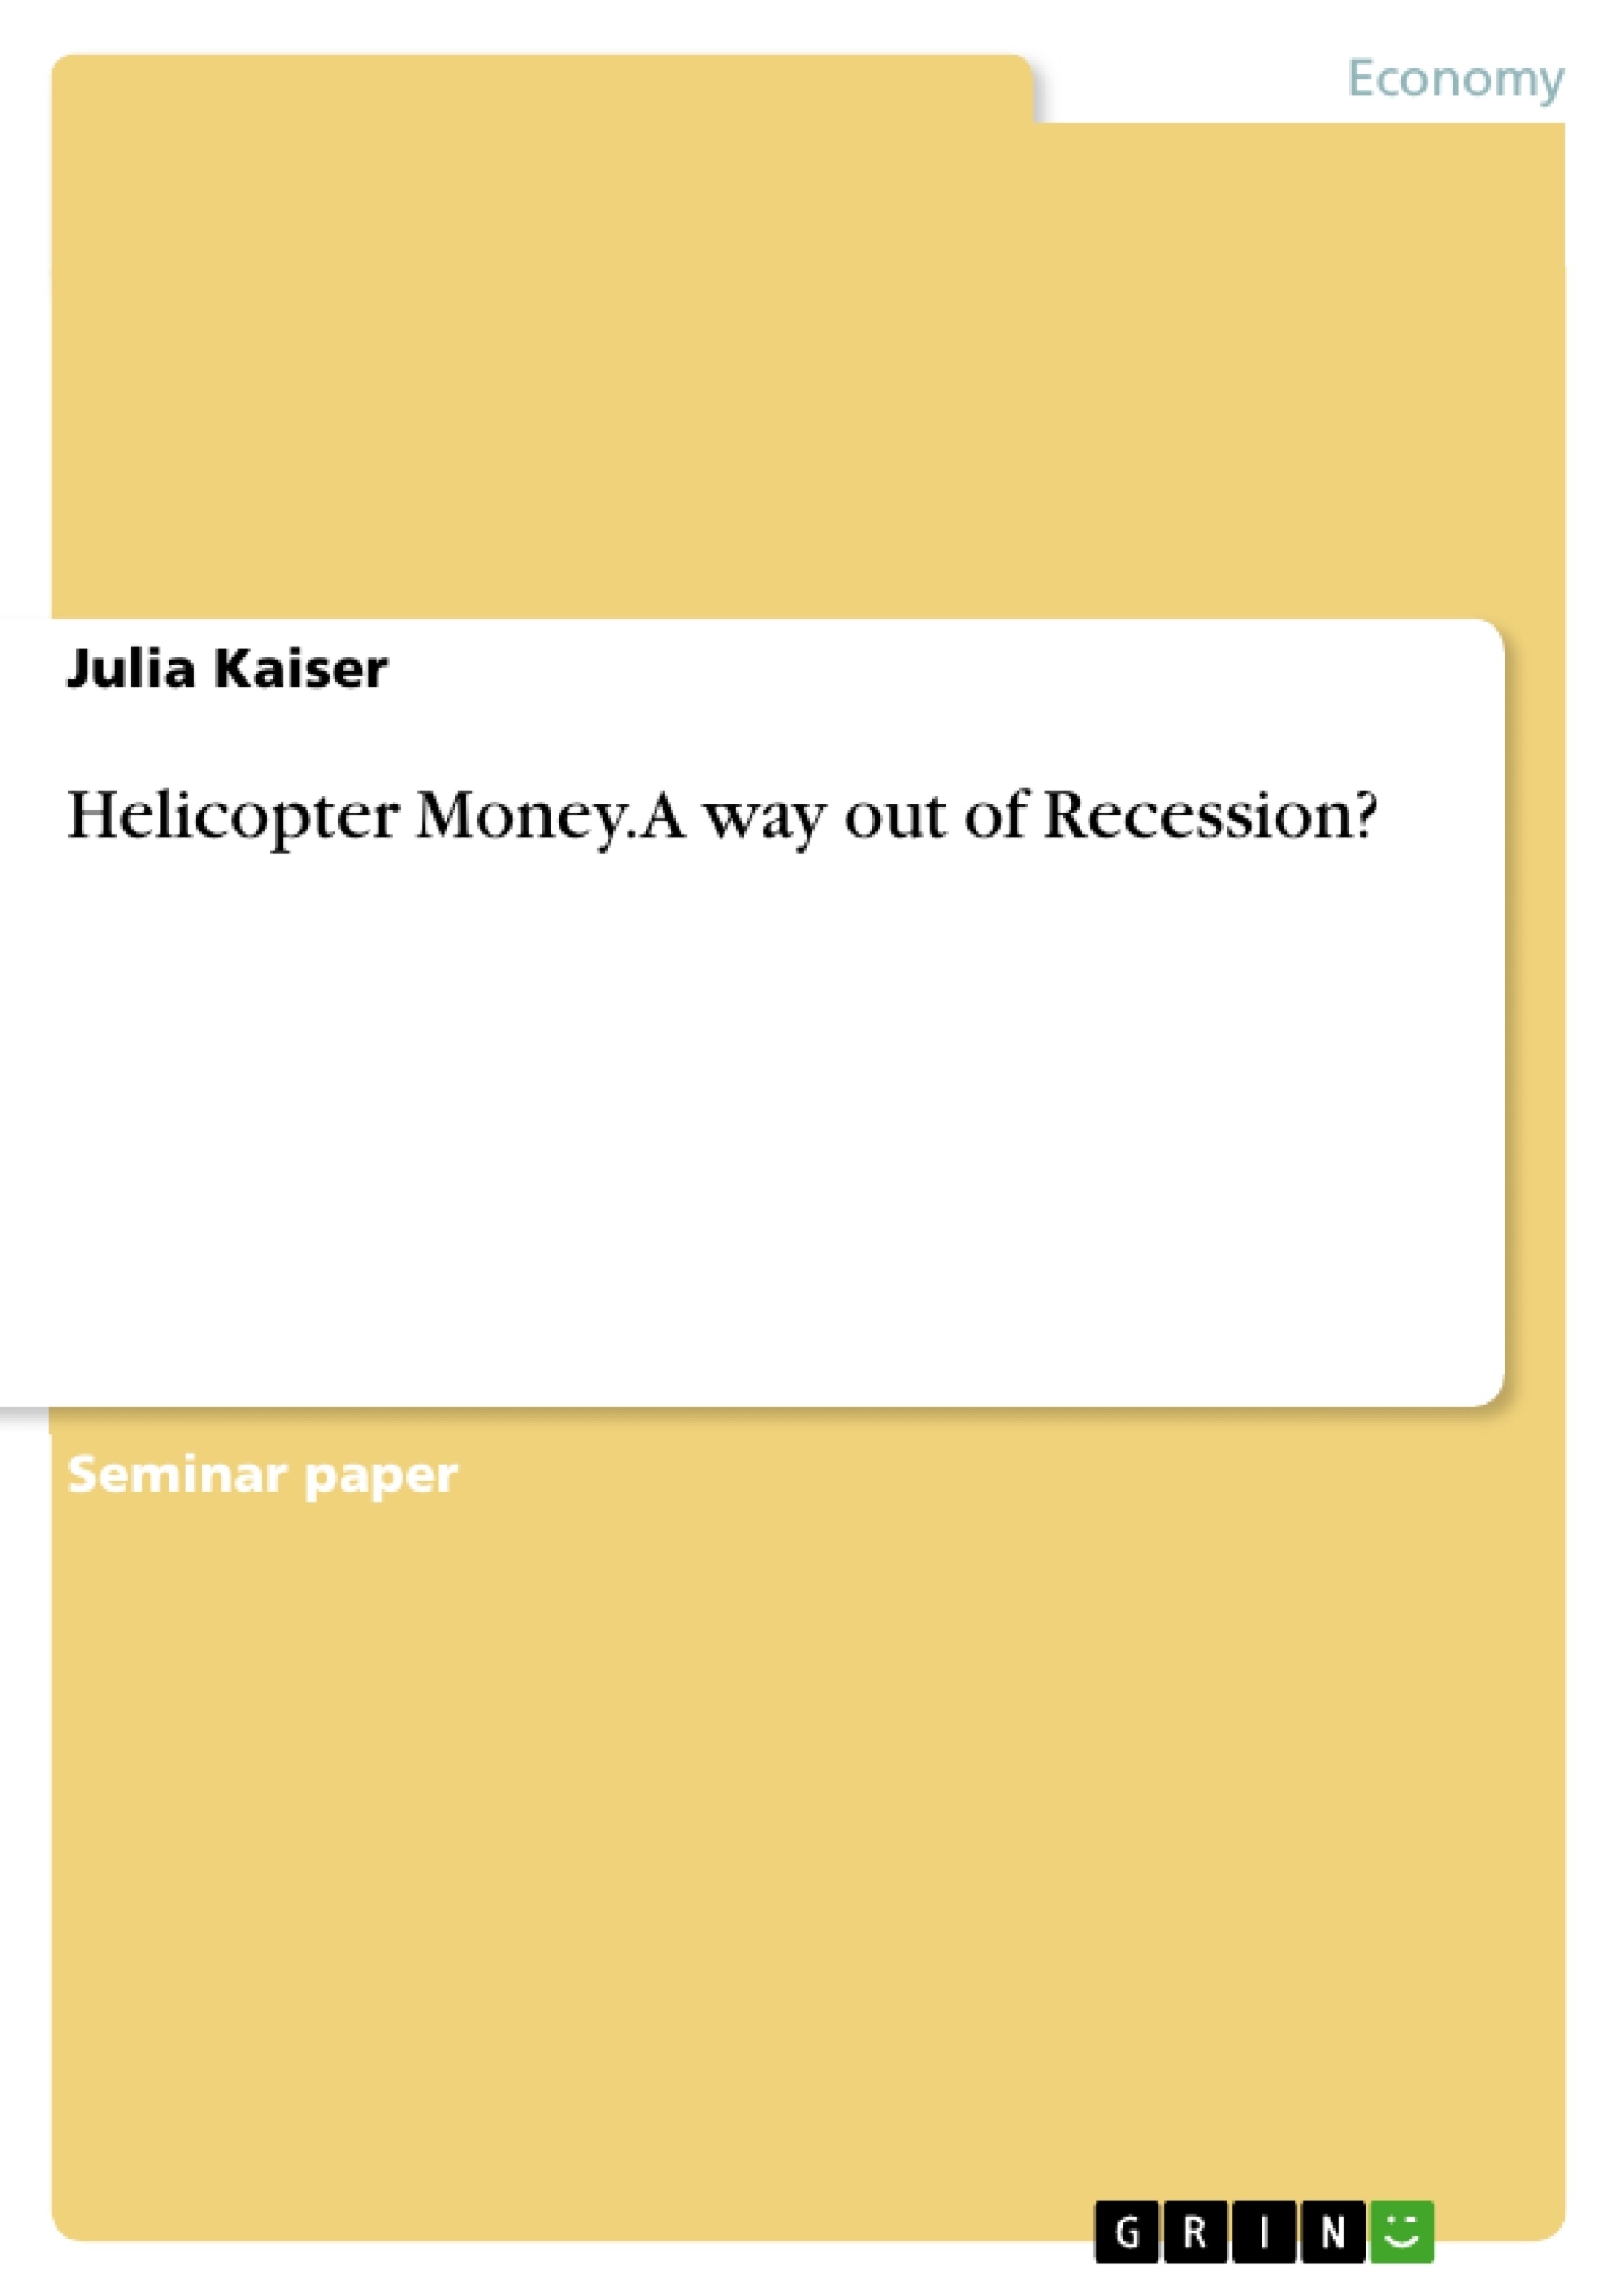 Title: Helicopter Money. A way out of Recession?